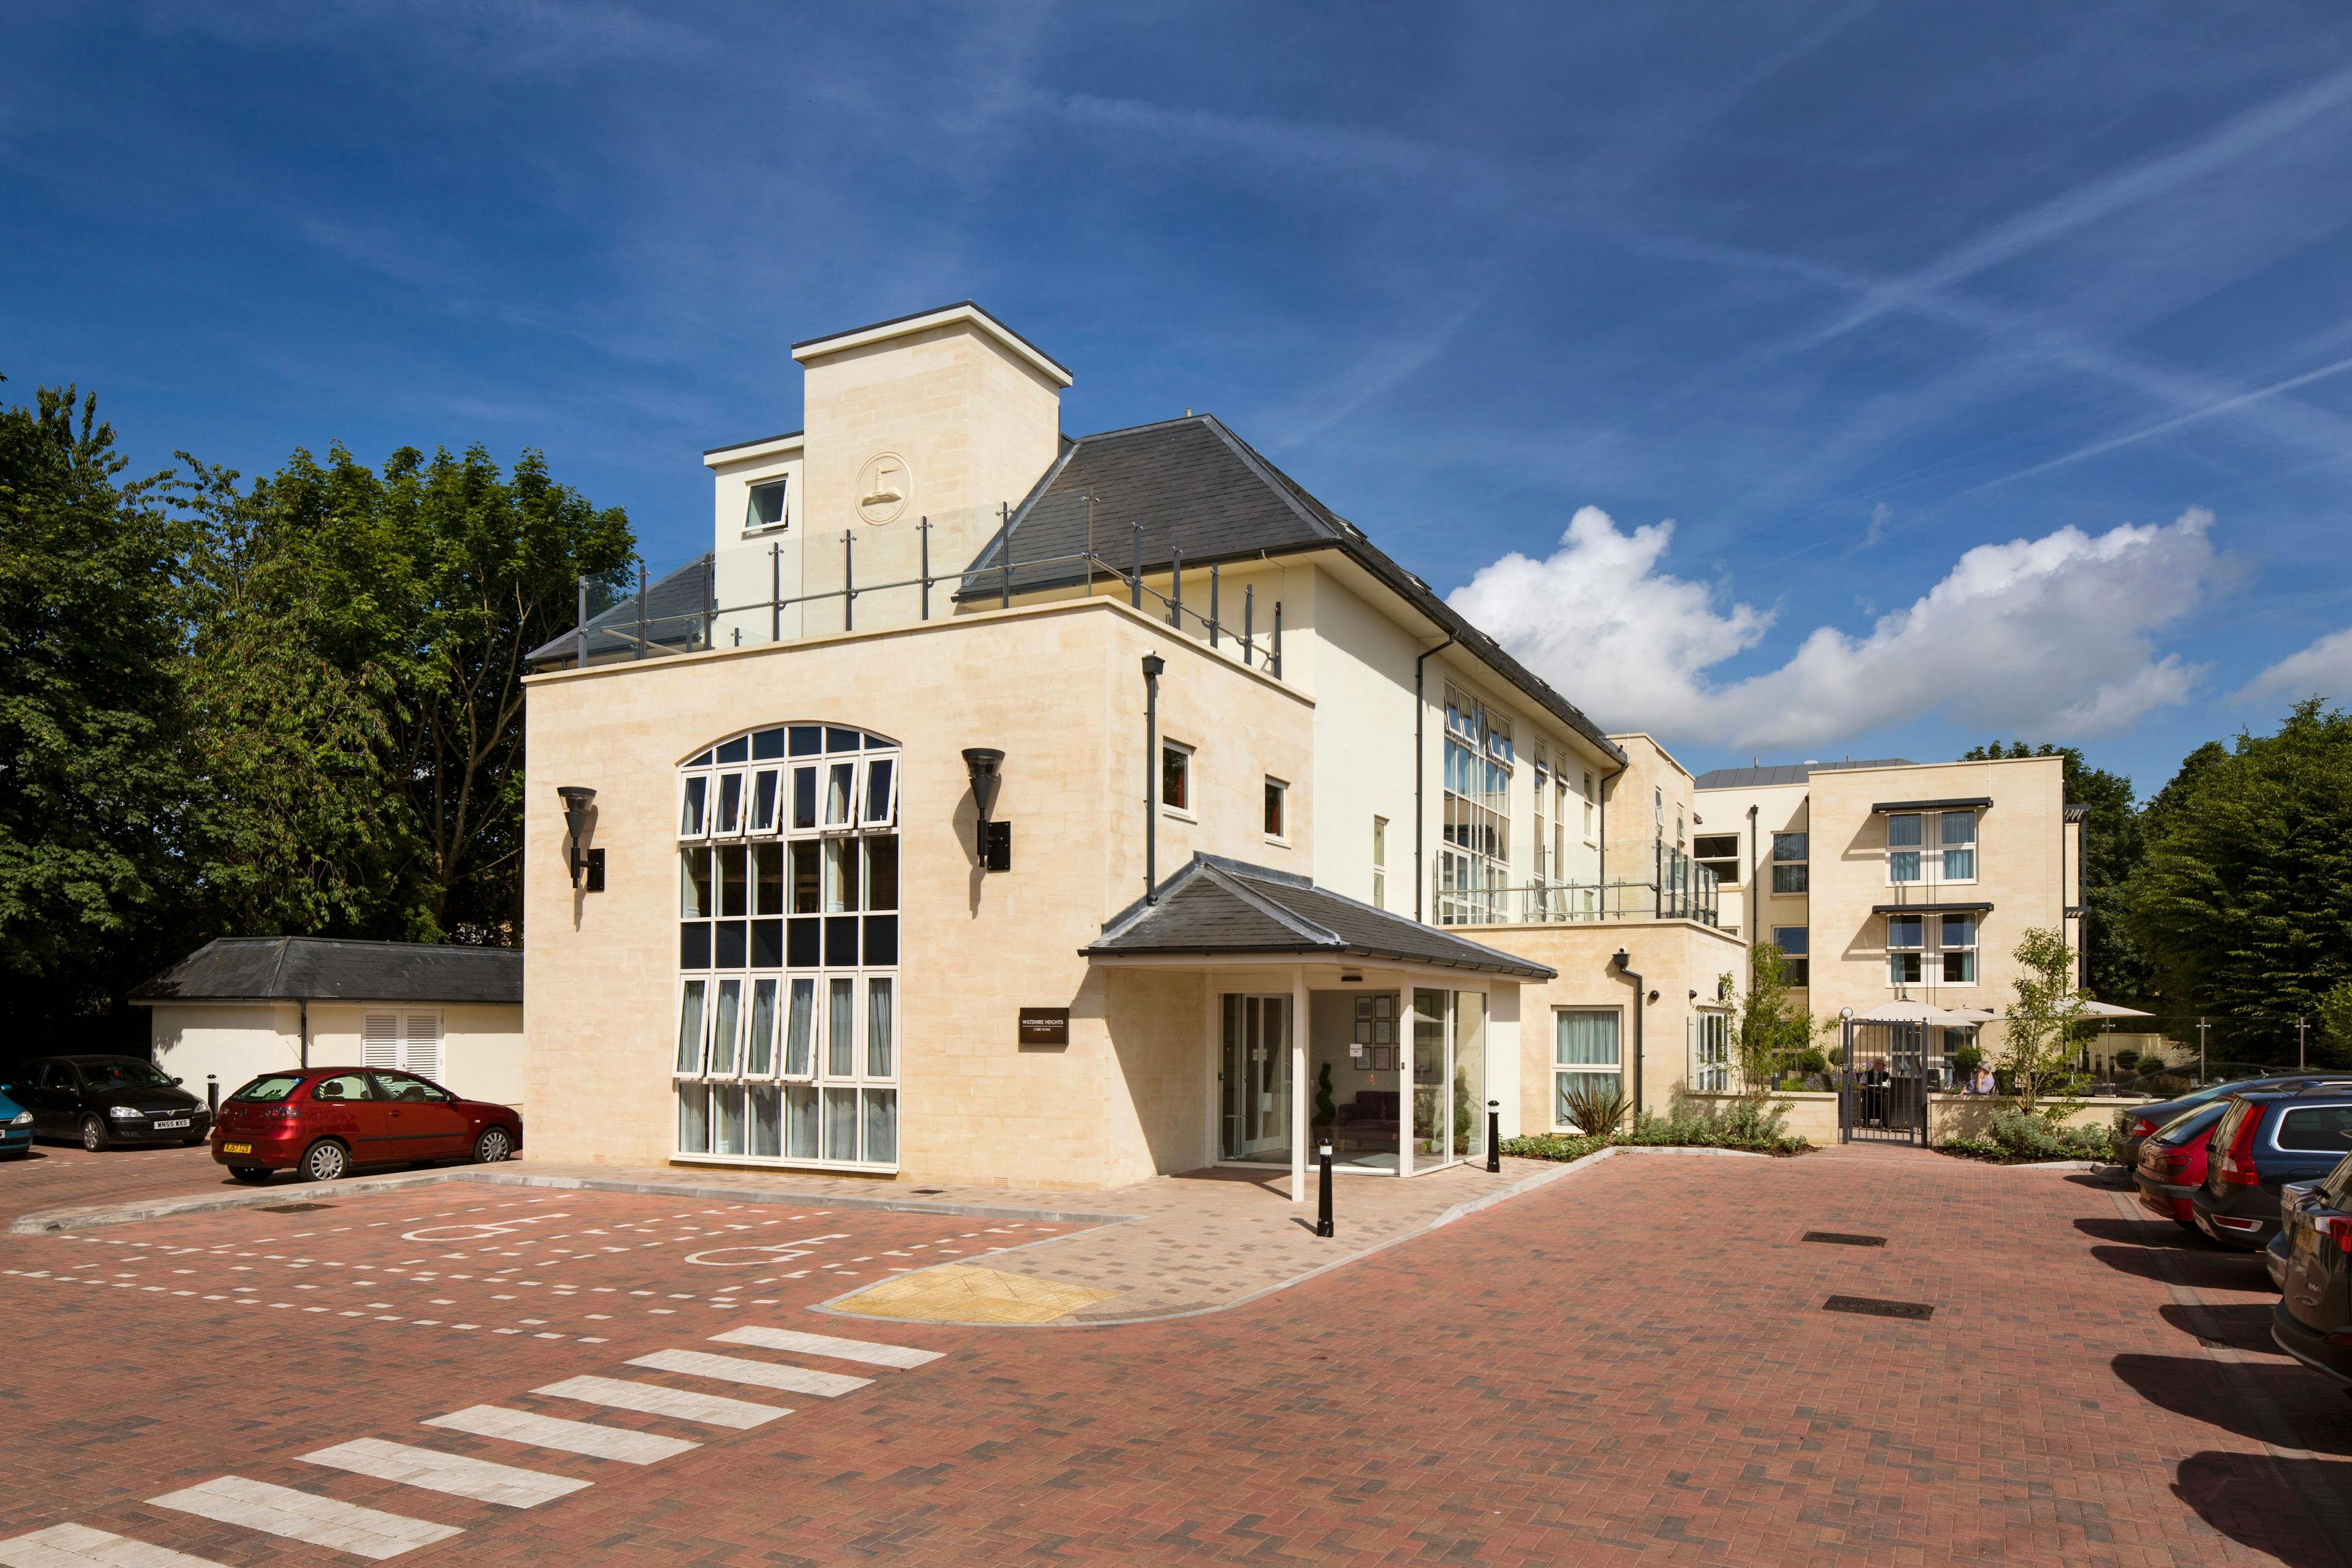 Wiltshire Heights care home